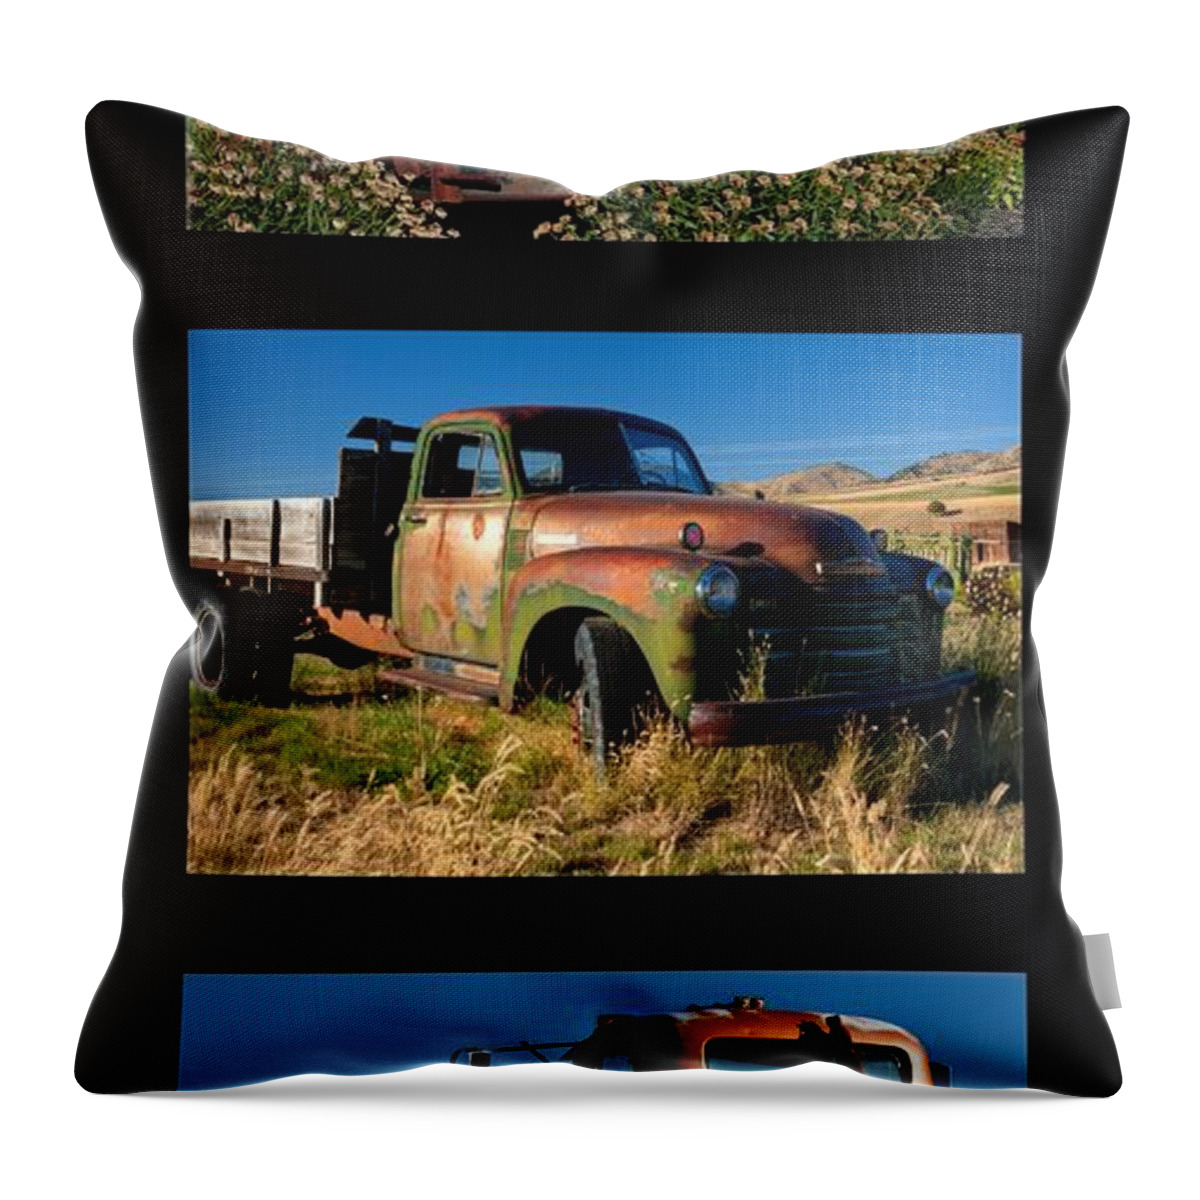 Triptych Throw Pillow featuring the photograph Old Guys Trio 4 by Idaho Scenic Images Linda Lantzy